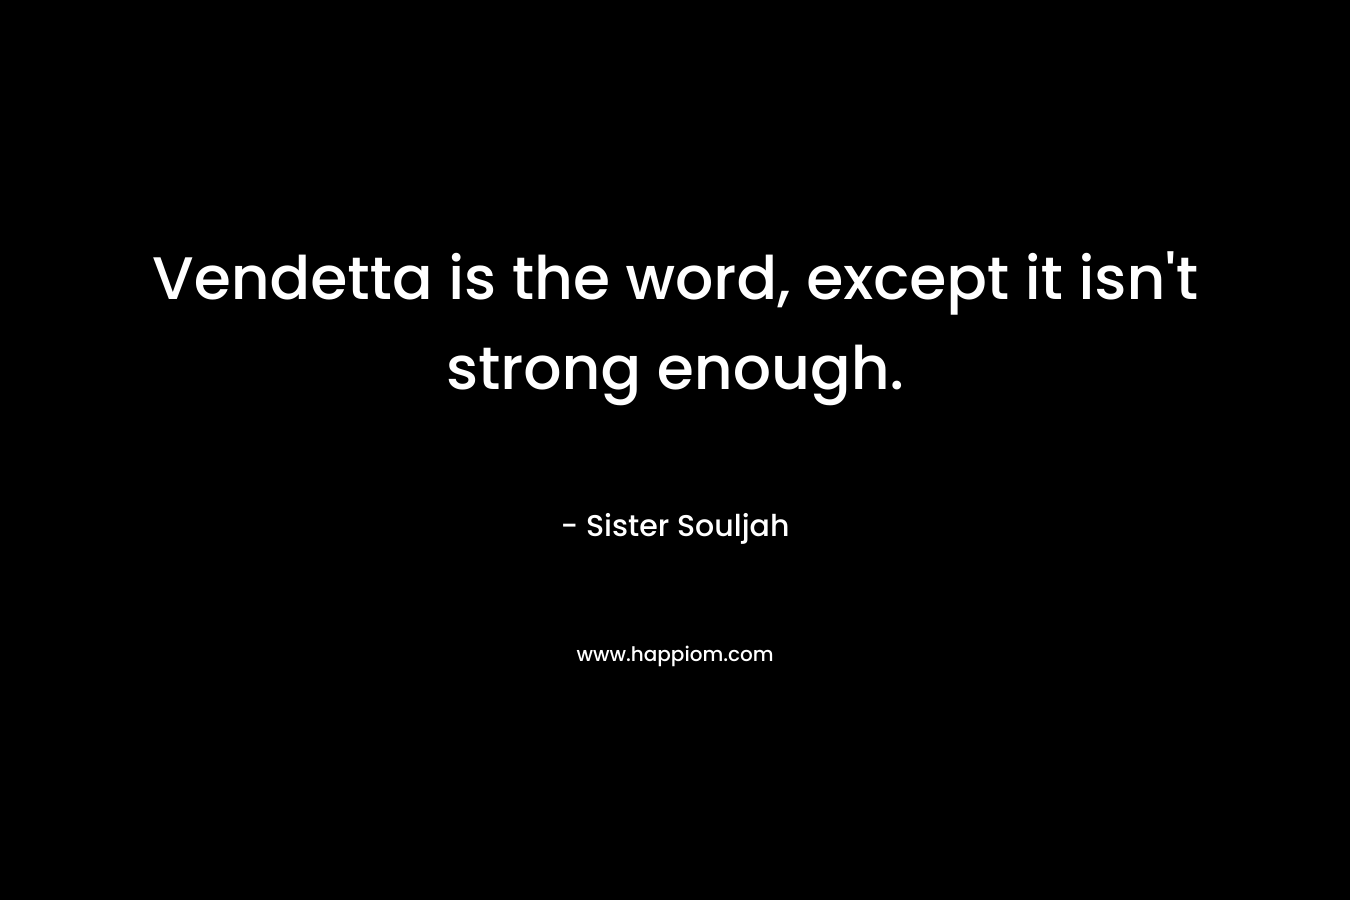 Vendetta is the word, except it isn’t strong enough. – Sister Souljah